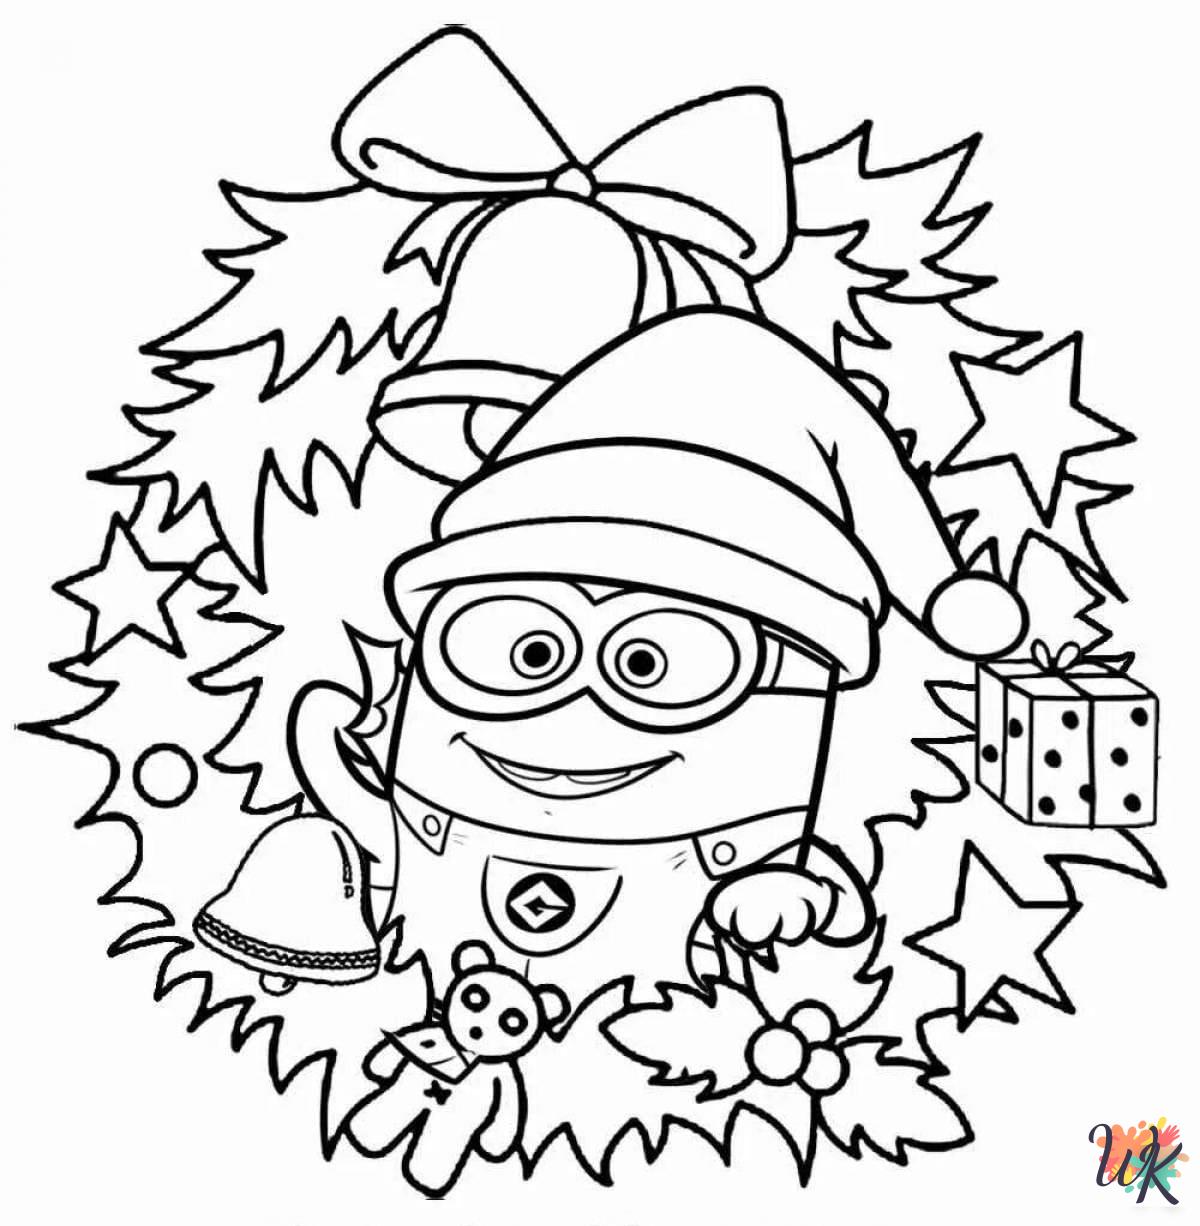 Minion Christmas coloring pages for adults